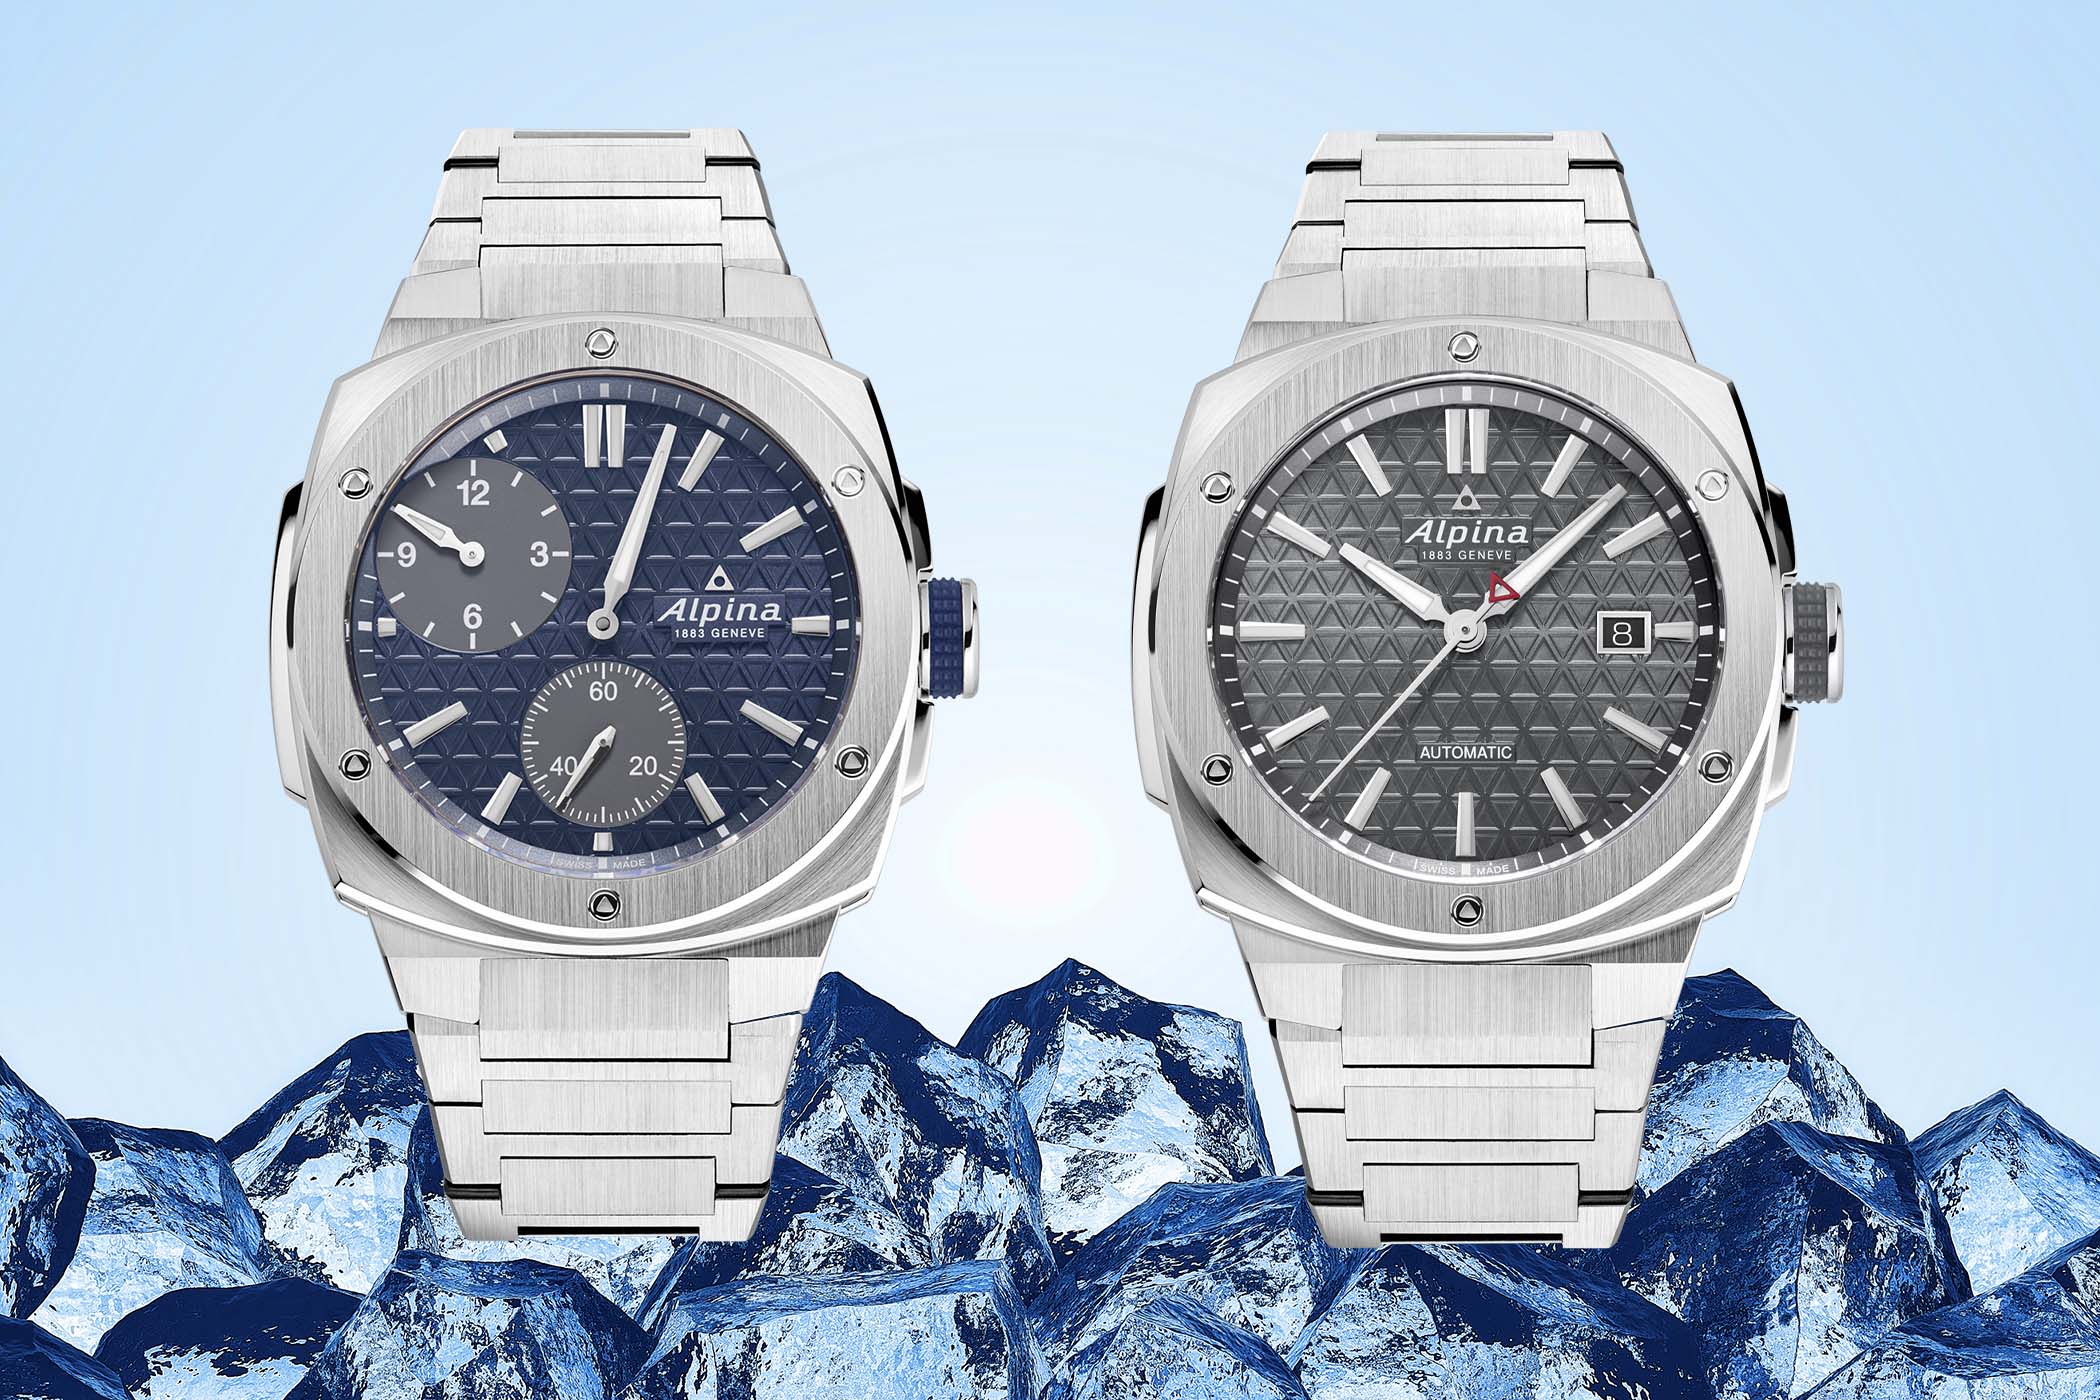 Alpina Alpiner Extreme Collection Now With Integrated Steel Bracelet